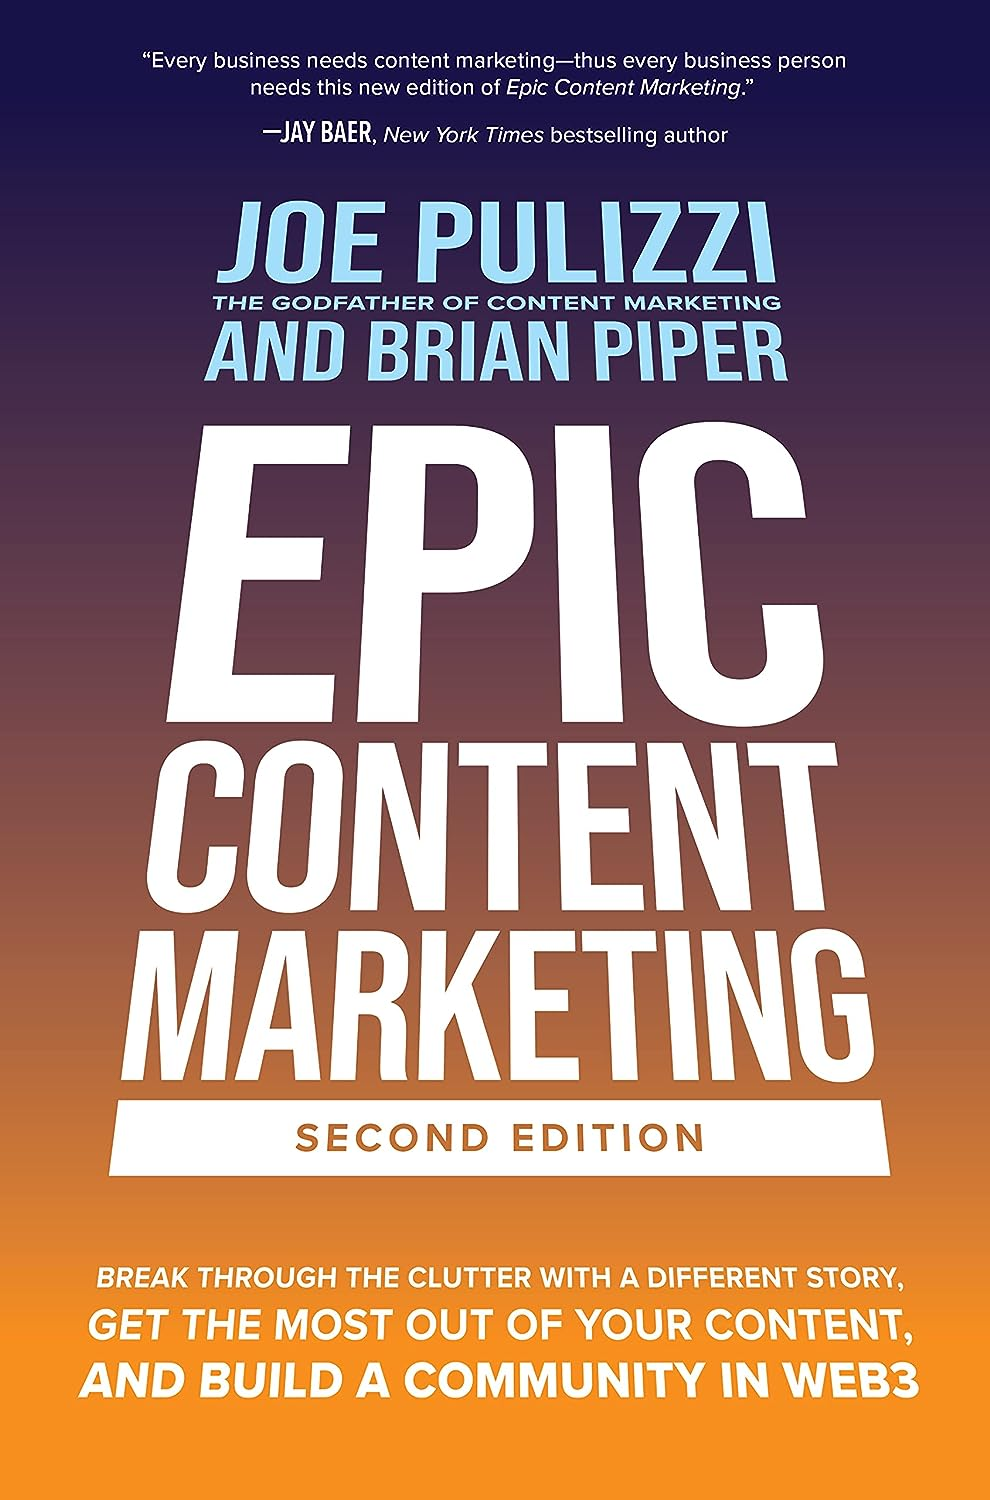 An image of the book cover for Epic Content Marketing by Joe Pulizzi, one of the top content creation books available in the market.